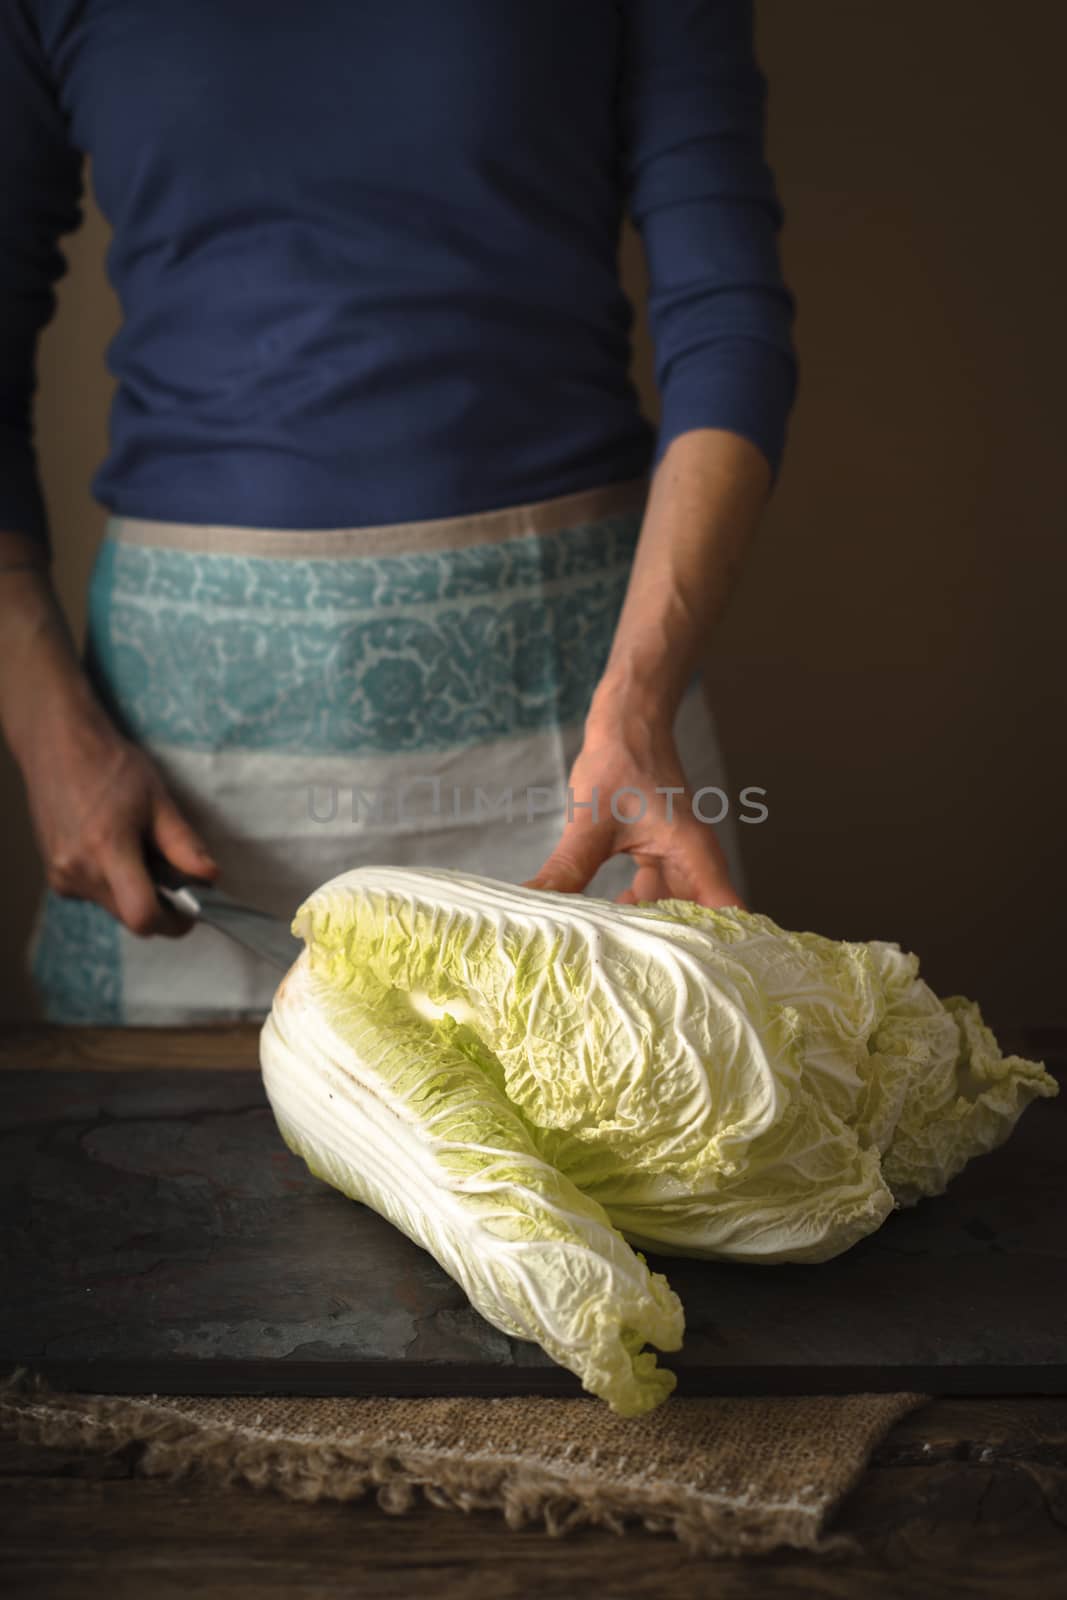 Woman cuts Chinese cabbage on a gray slate vertical